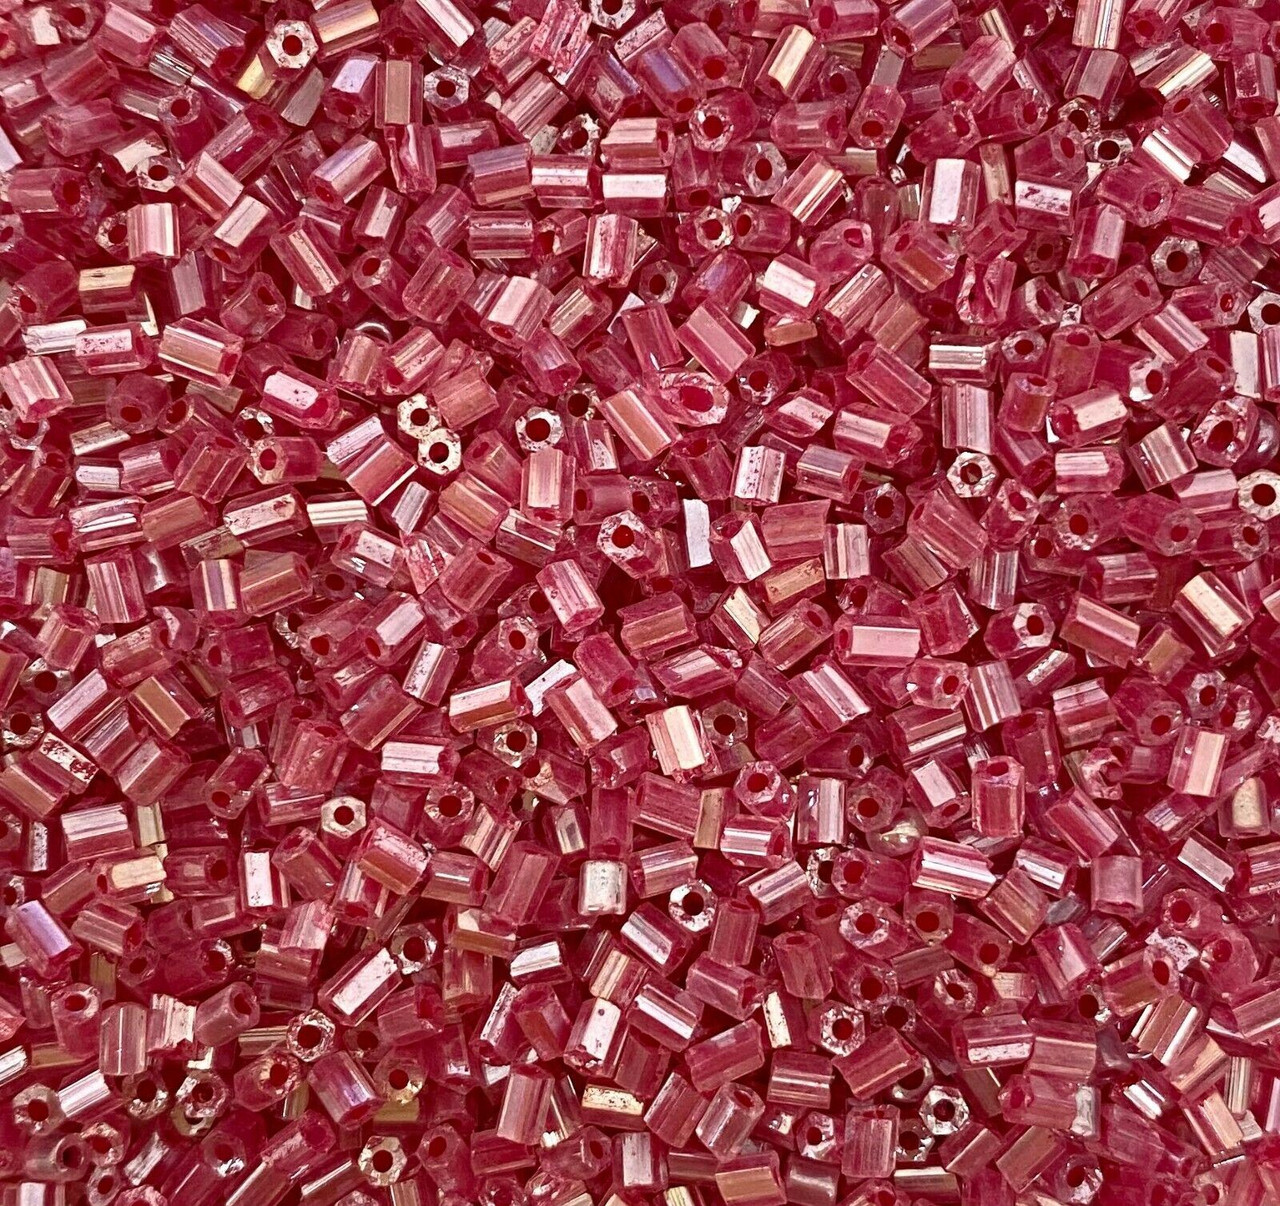 50g glass HEX seed beads - Crimson Opaque Lustred - size 11/0 (approx 2mm)